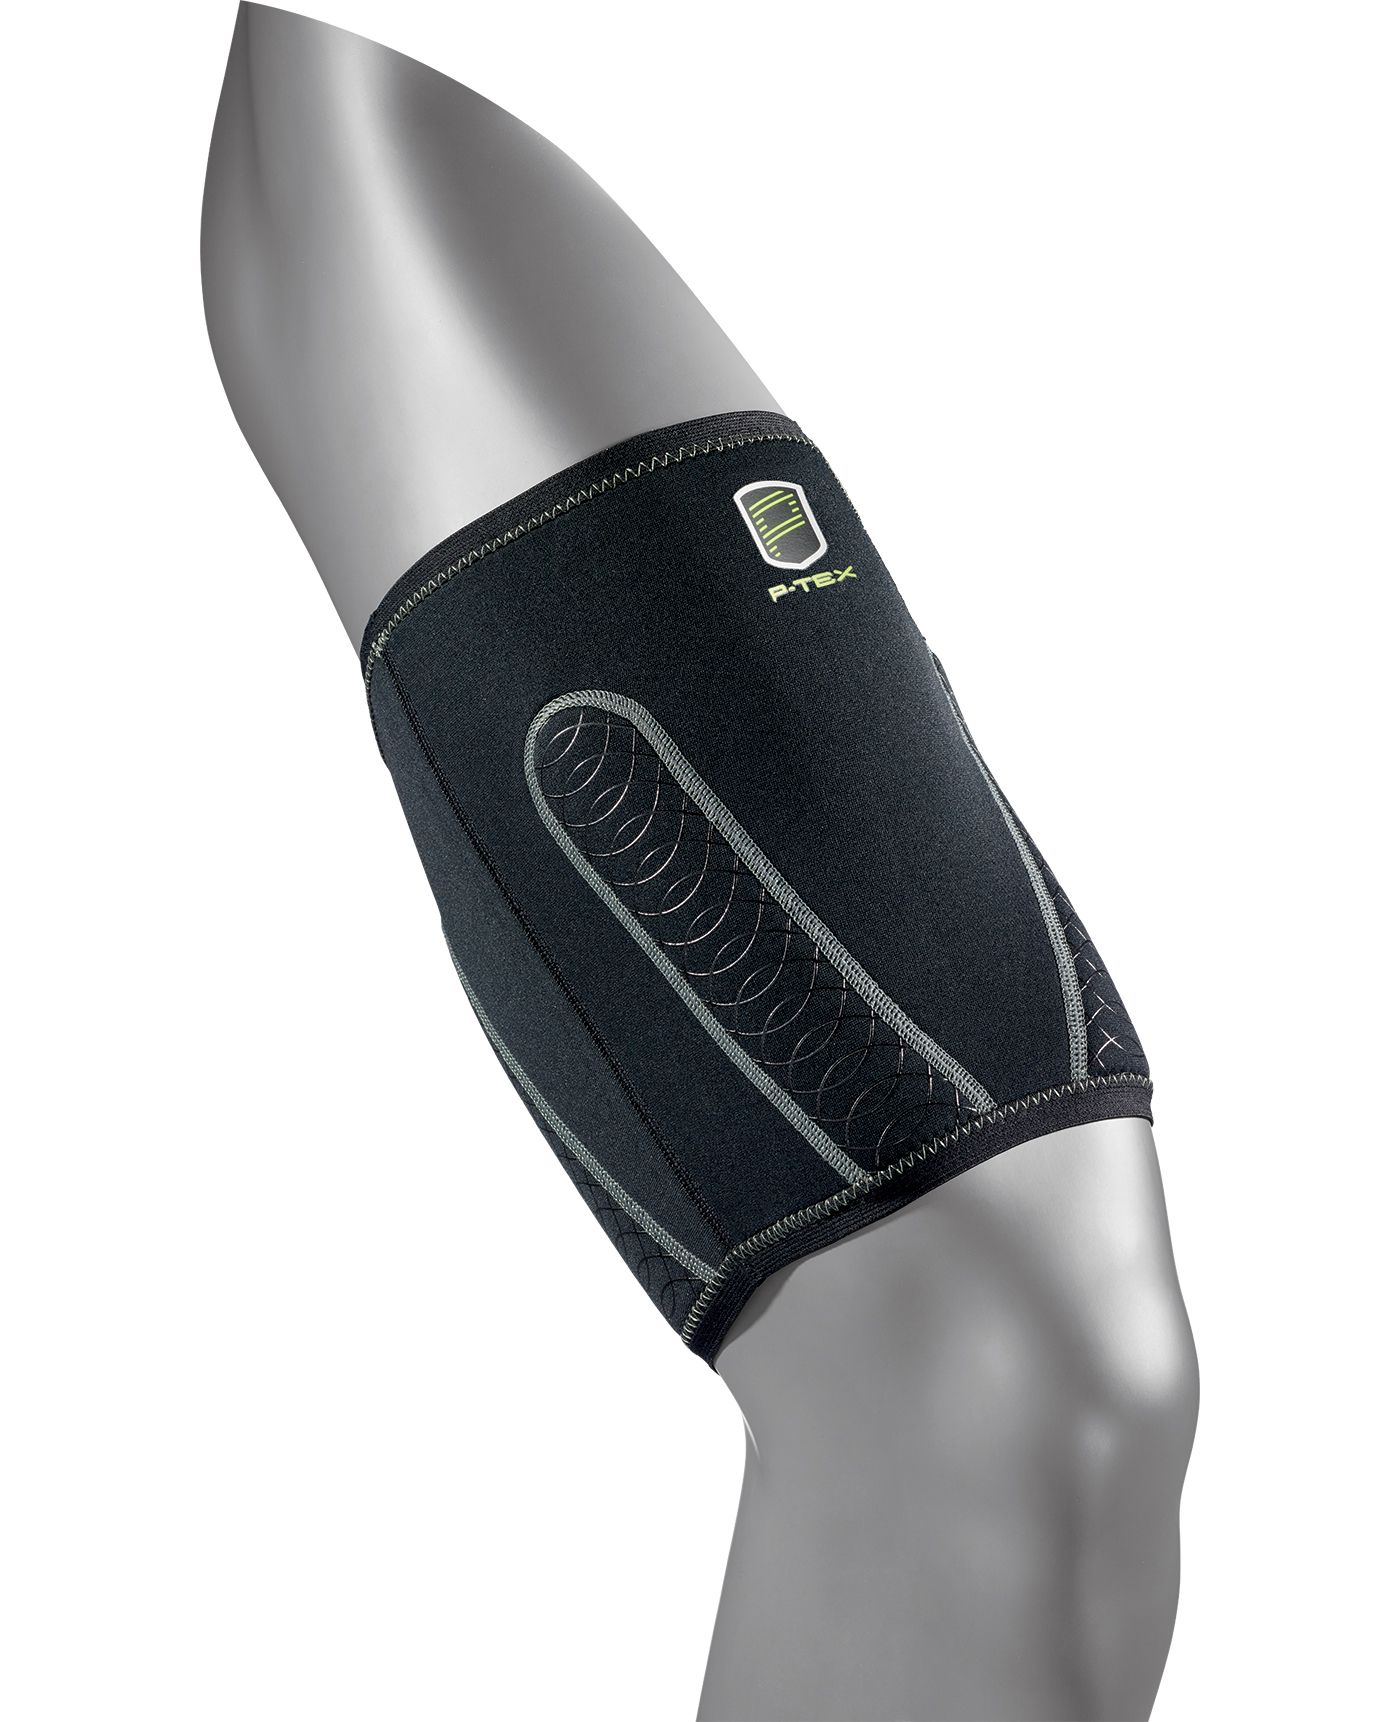 P-TEX PRO Thigh and Groin Support Sleeve | DICK'S Sporting Goods